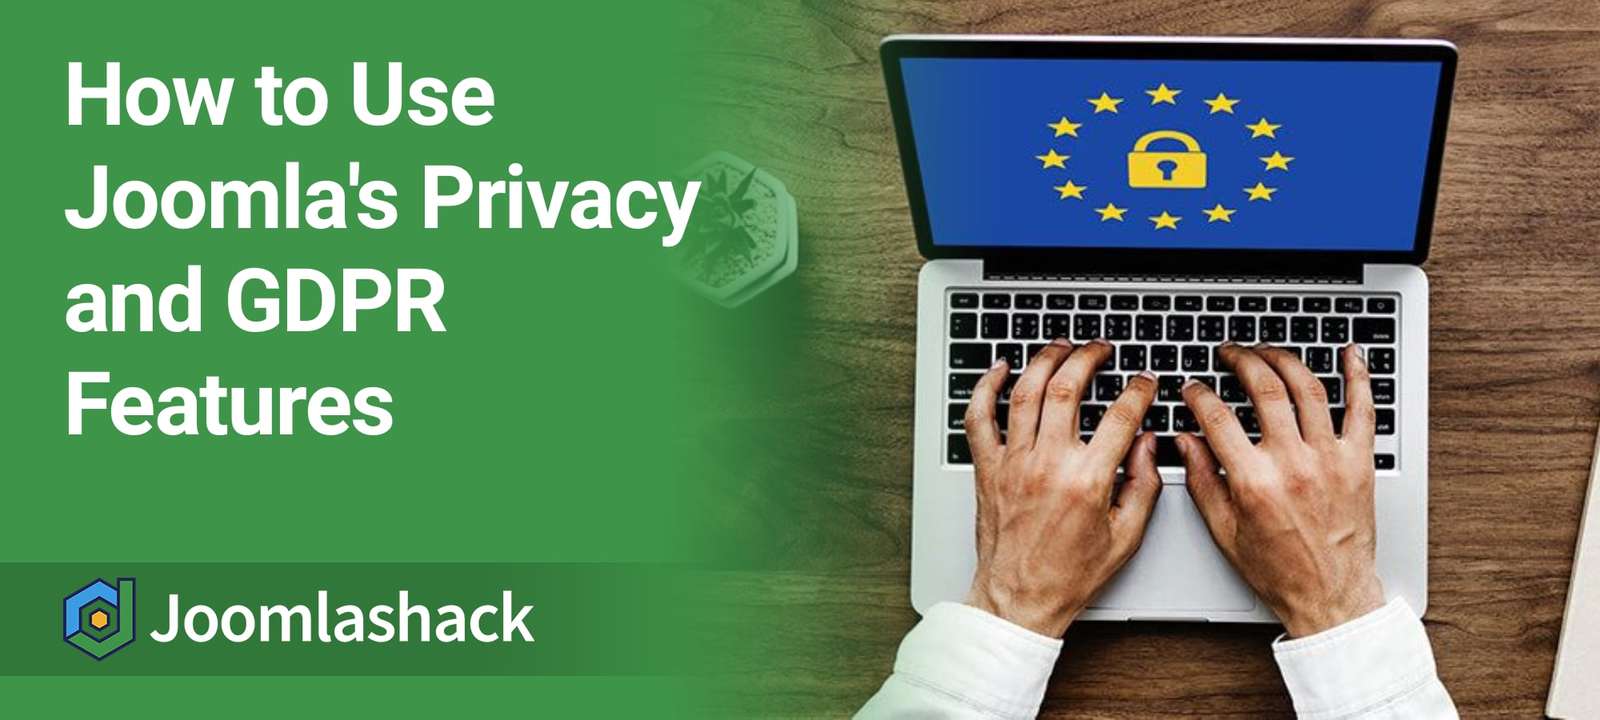 How to Use Joomla's Privacy and GDPR Features